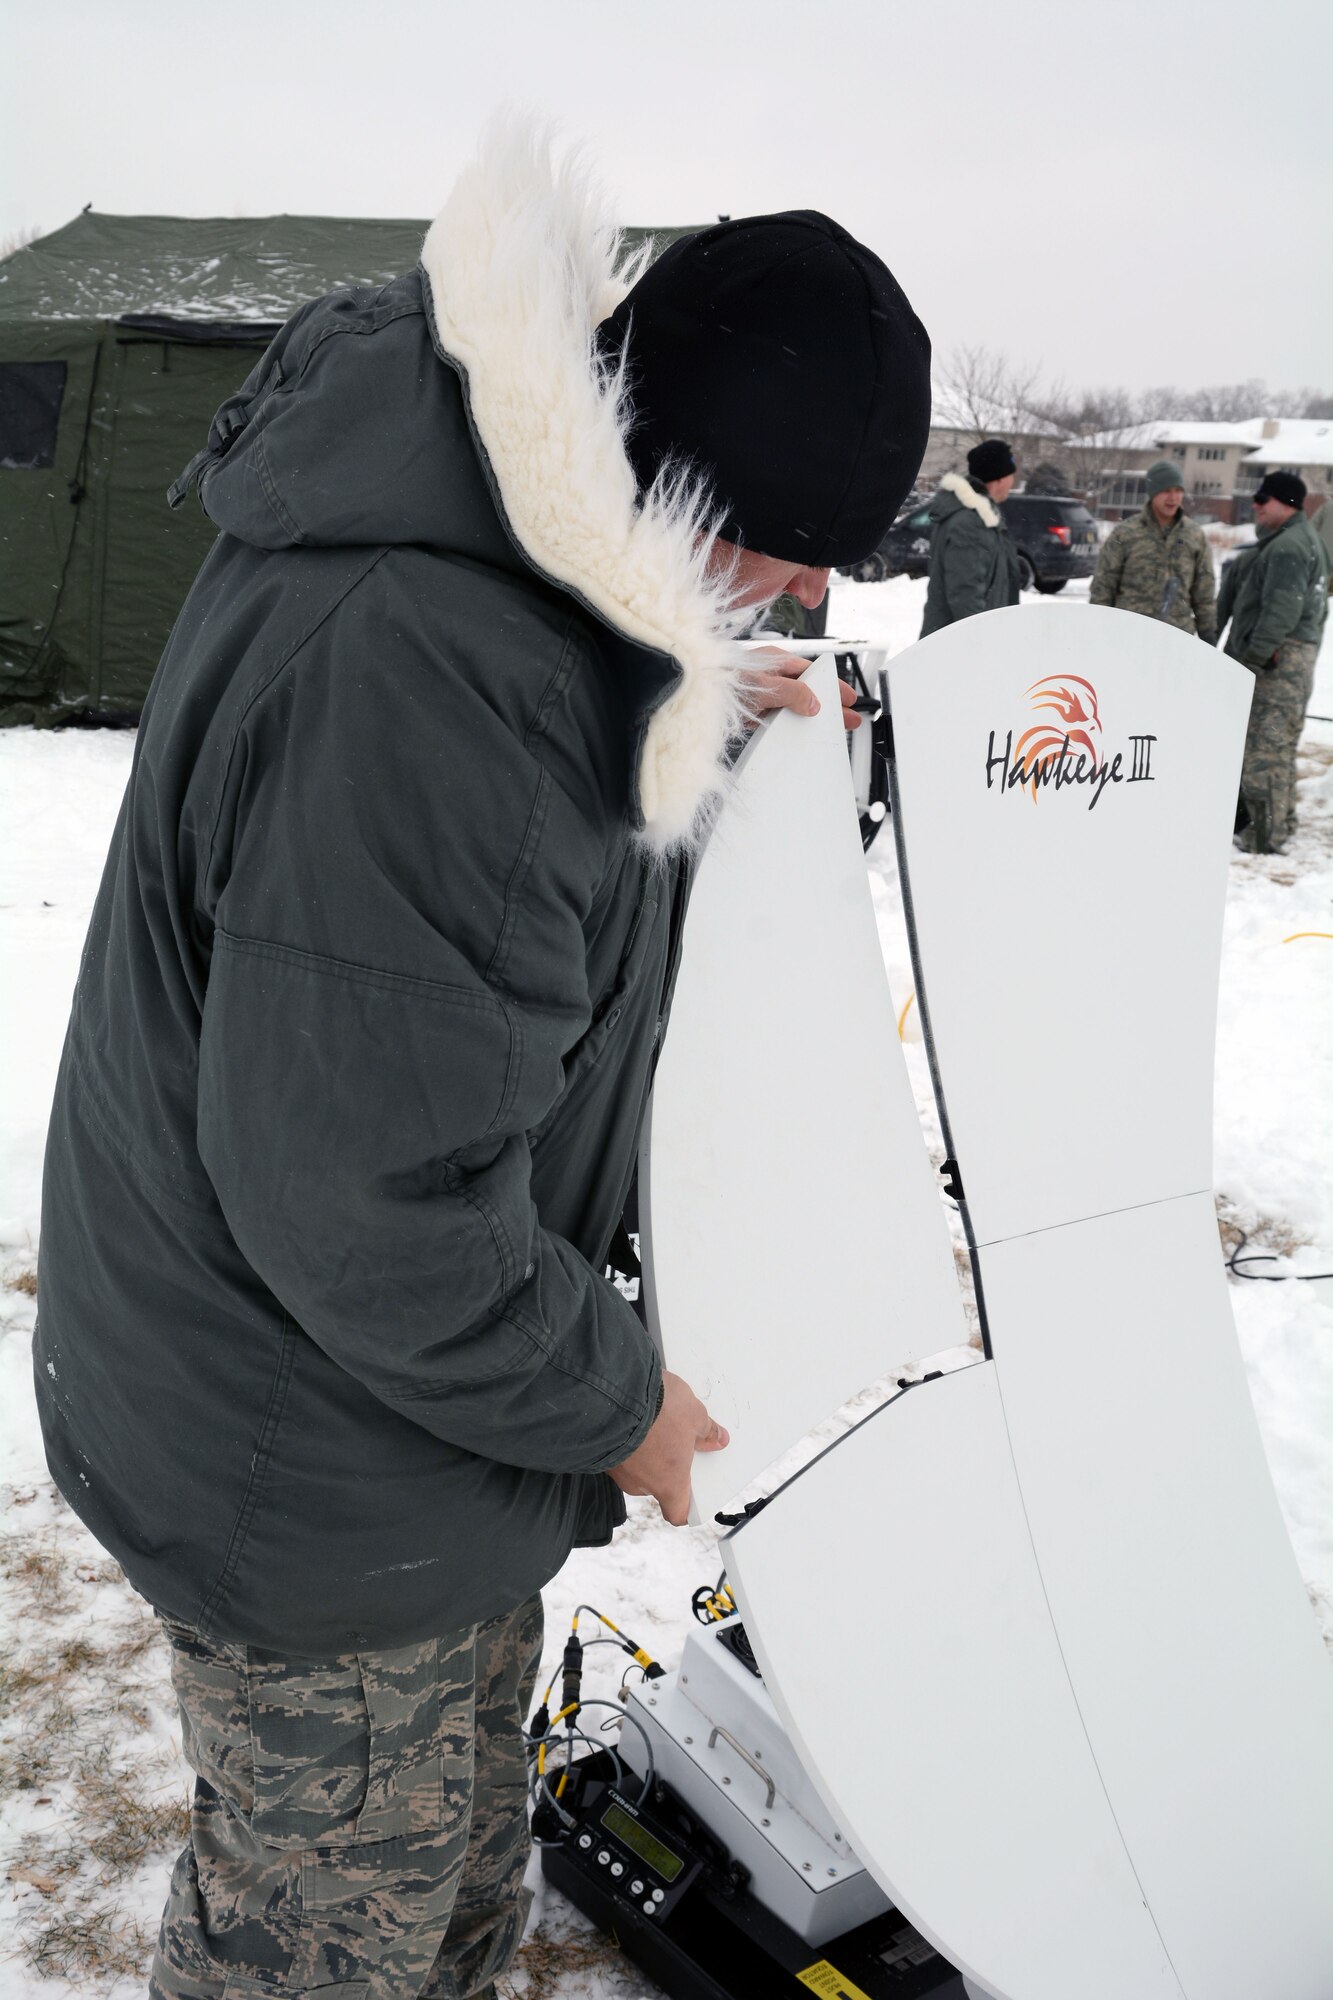 Staff Sgt. Cody Sachtjen, cyber transport systems specialist with the Air National Guard's 115th Fighter Wing, erects a data uplink satellite dish for the Joint Interoperability Site Communications Capability team's network and telephone systems during the State Interoperable Mobile Communications Exercise (SIMCOM) in Fitchburg, Wis., Feb 7, 2018. The annual SIMCOM exercise tests the interoperability of federal, state and local emergency communications agencies. (U.S. Air National Guard photo by Tech. Sgt. Mary Greenwood)